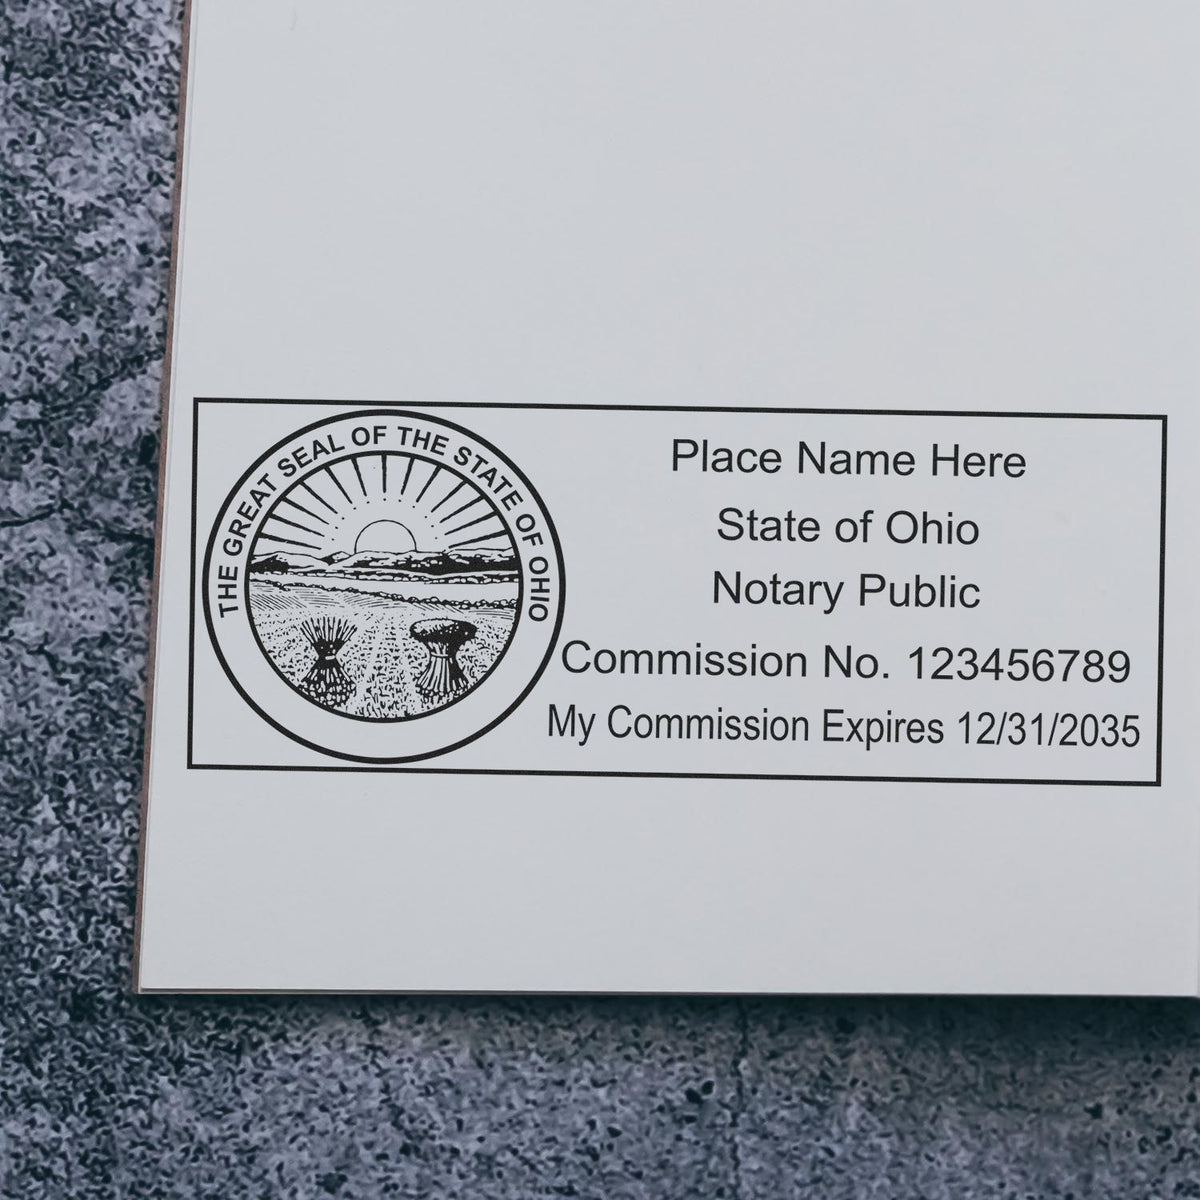 A lifestyle photo showing a stamped image of the MaxLight Premium Pre-Inked Ohio State Seal Notarial Stamp on a piece of paper